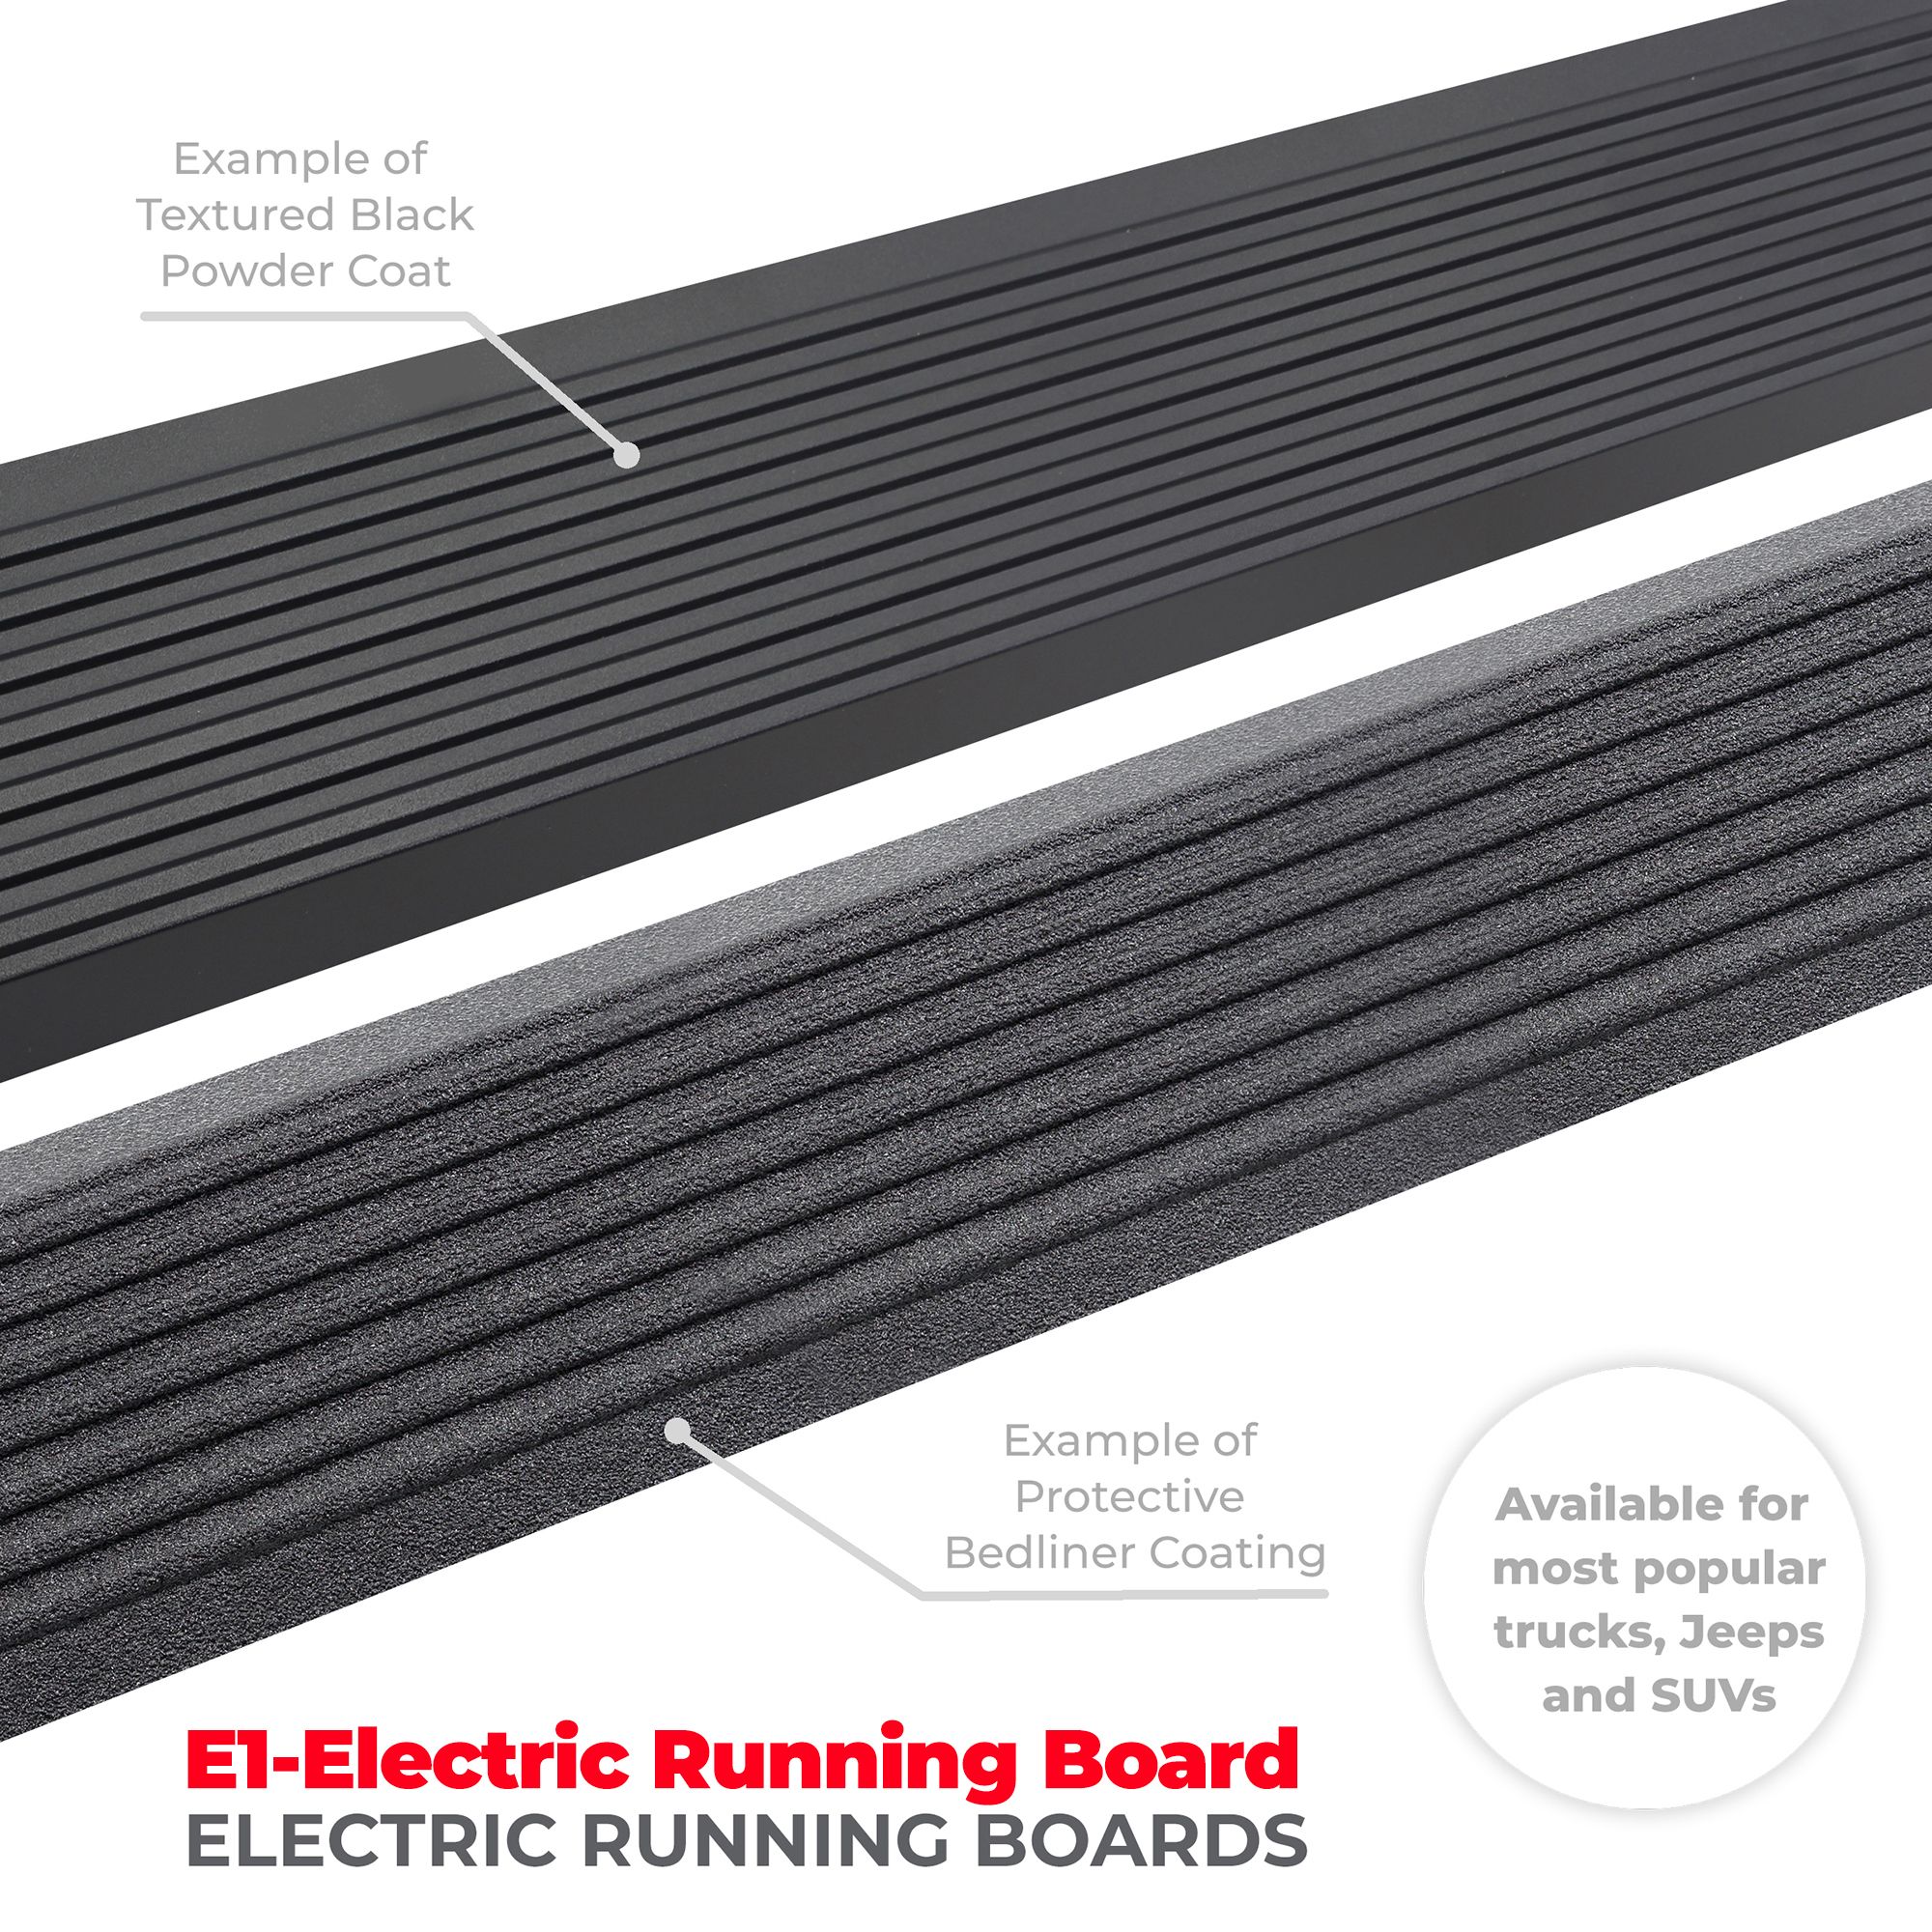 Go Rhino 20442568T - E1 Electric Running Boards With Mounting Brackets - Protective Bedliner Coating